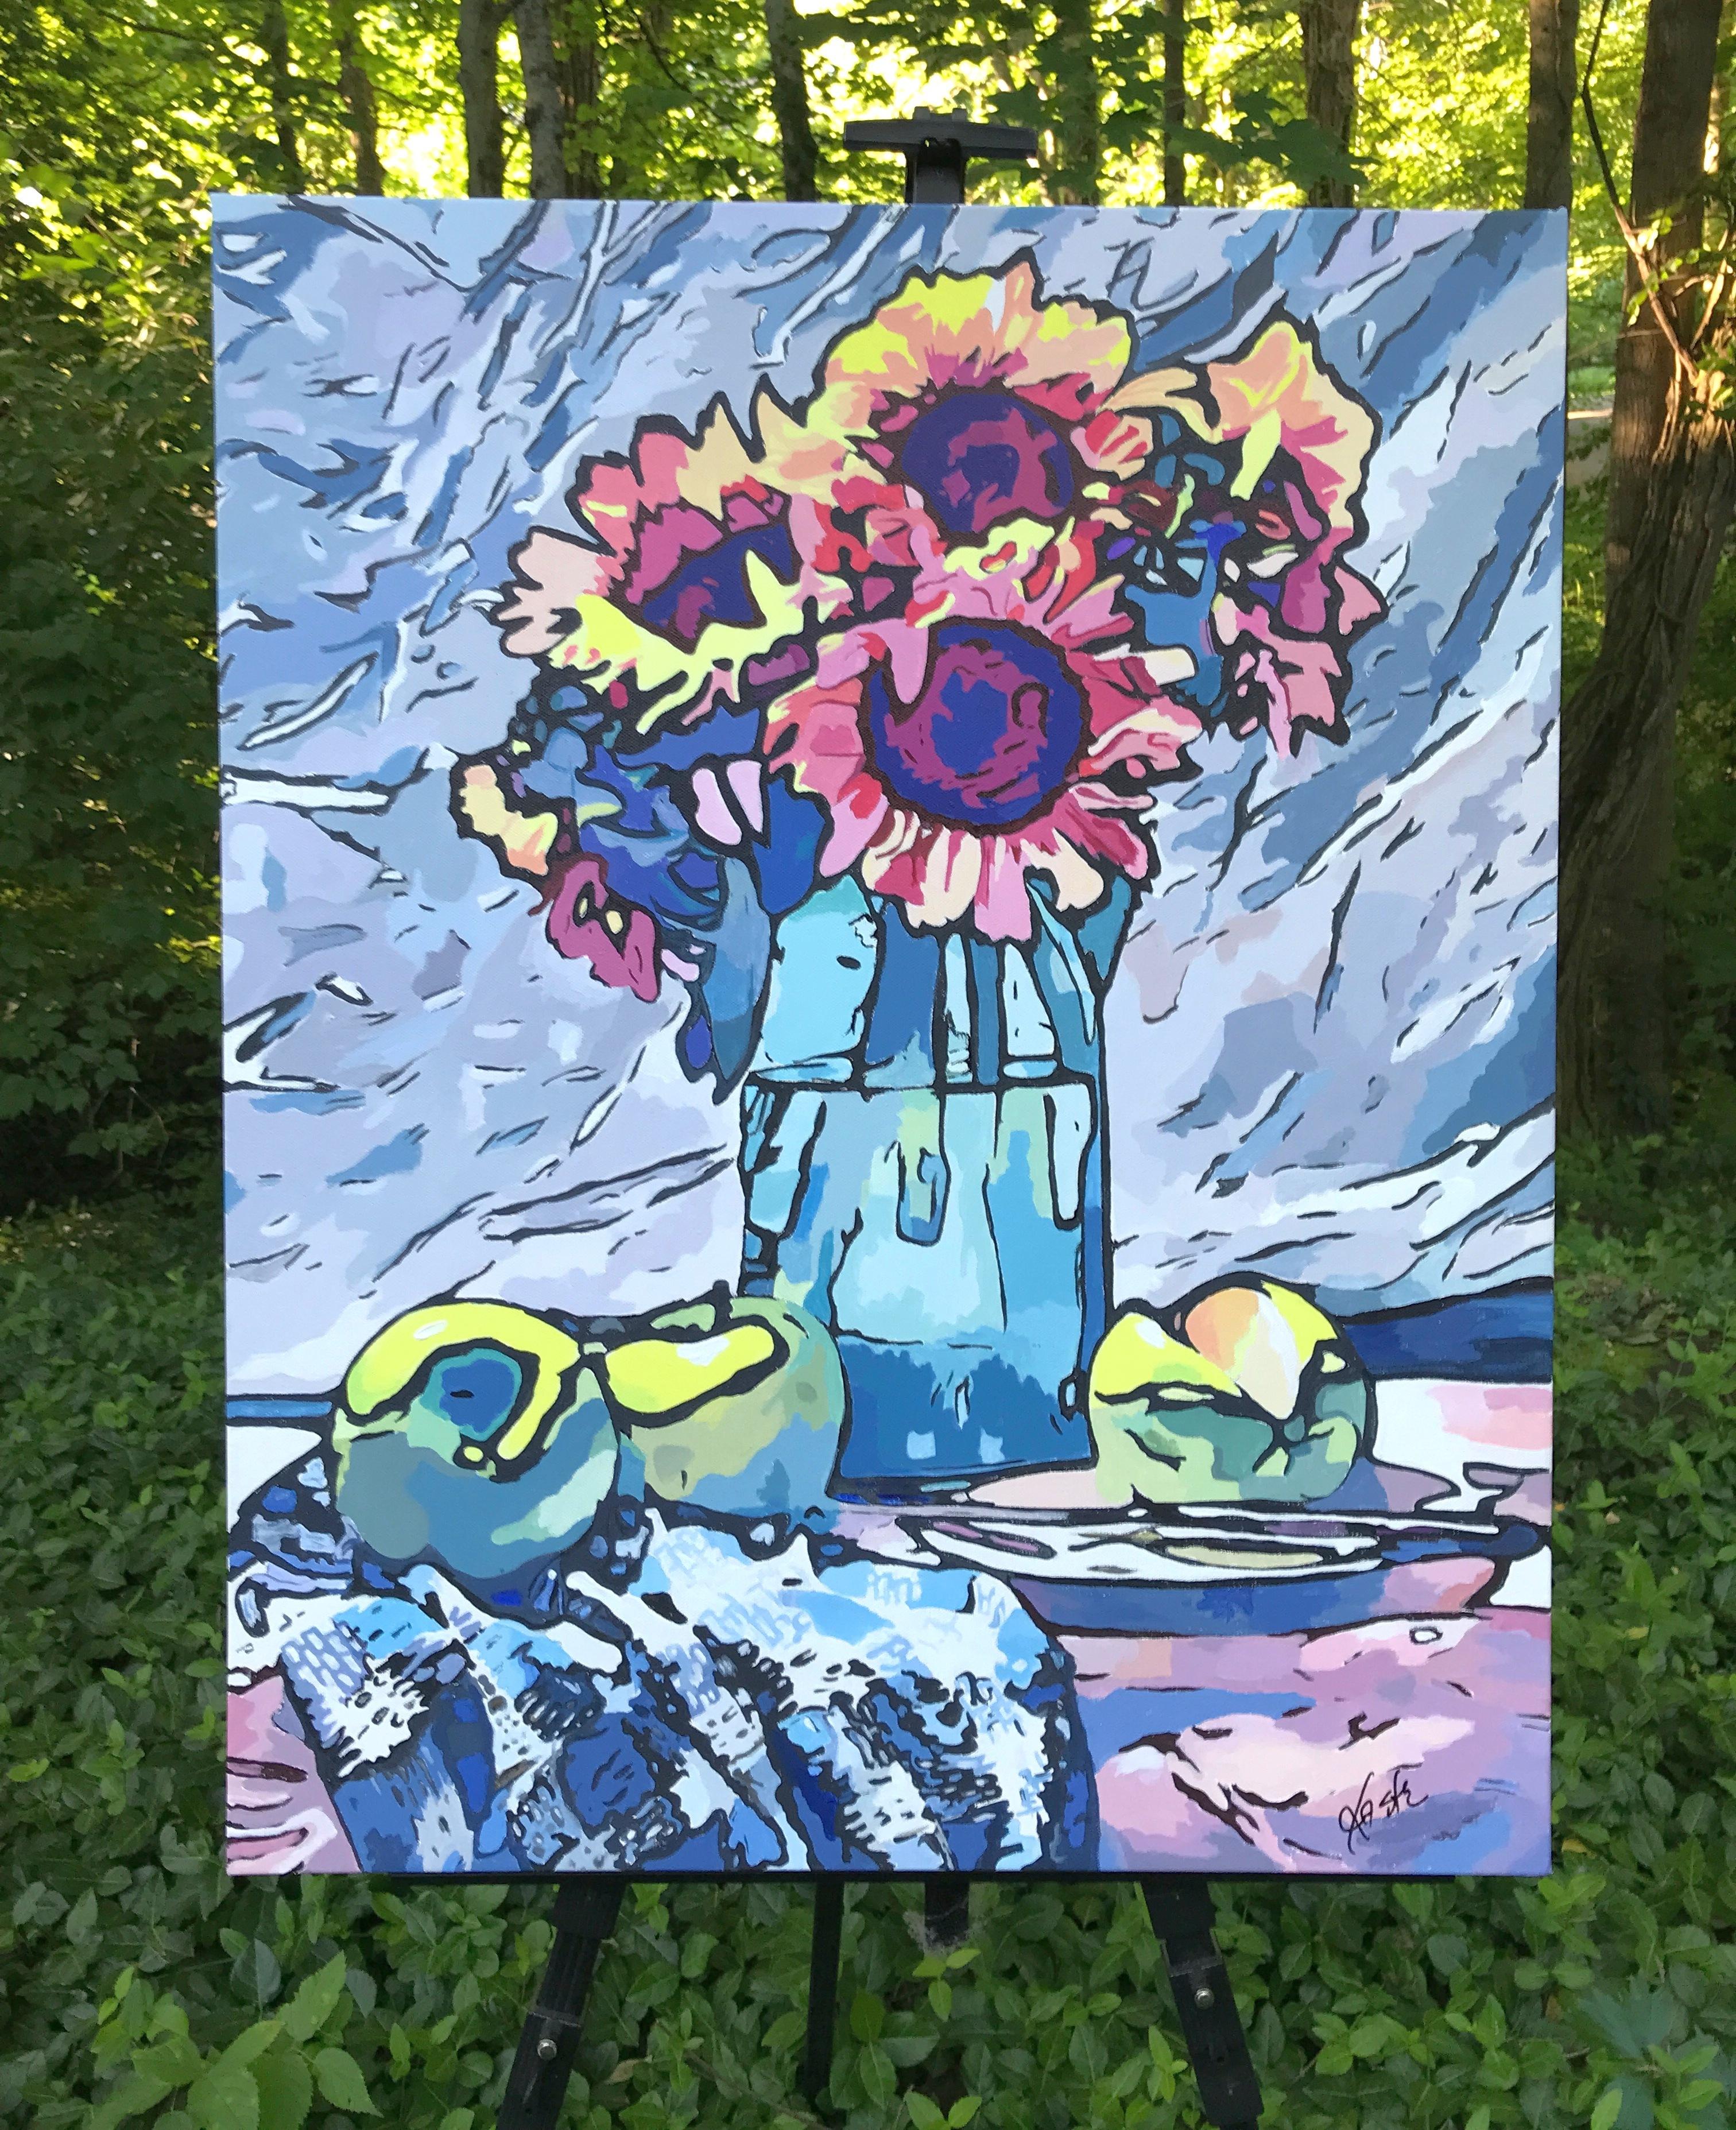 Sunflower Medley with Apples, Original Painting - Blue Still-Life Painting by John Jaster